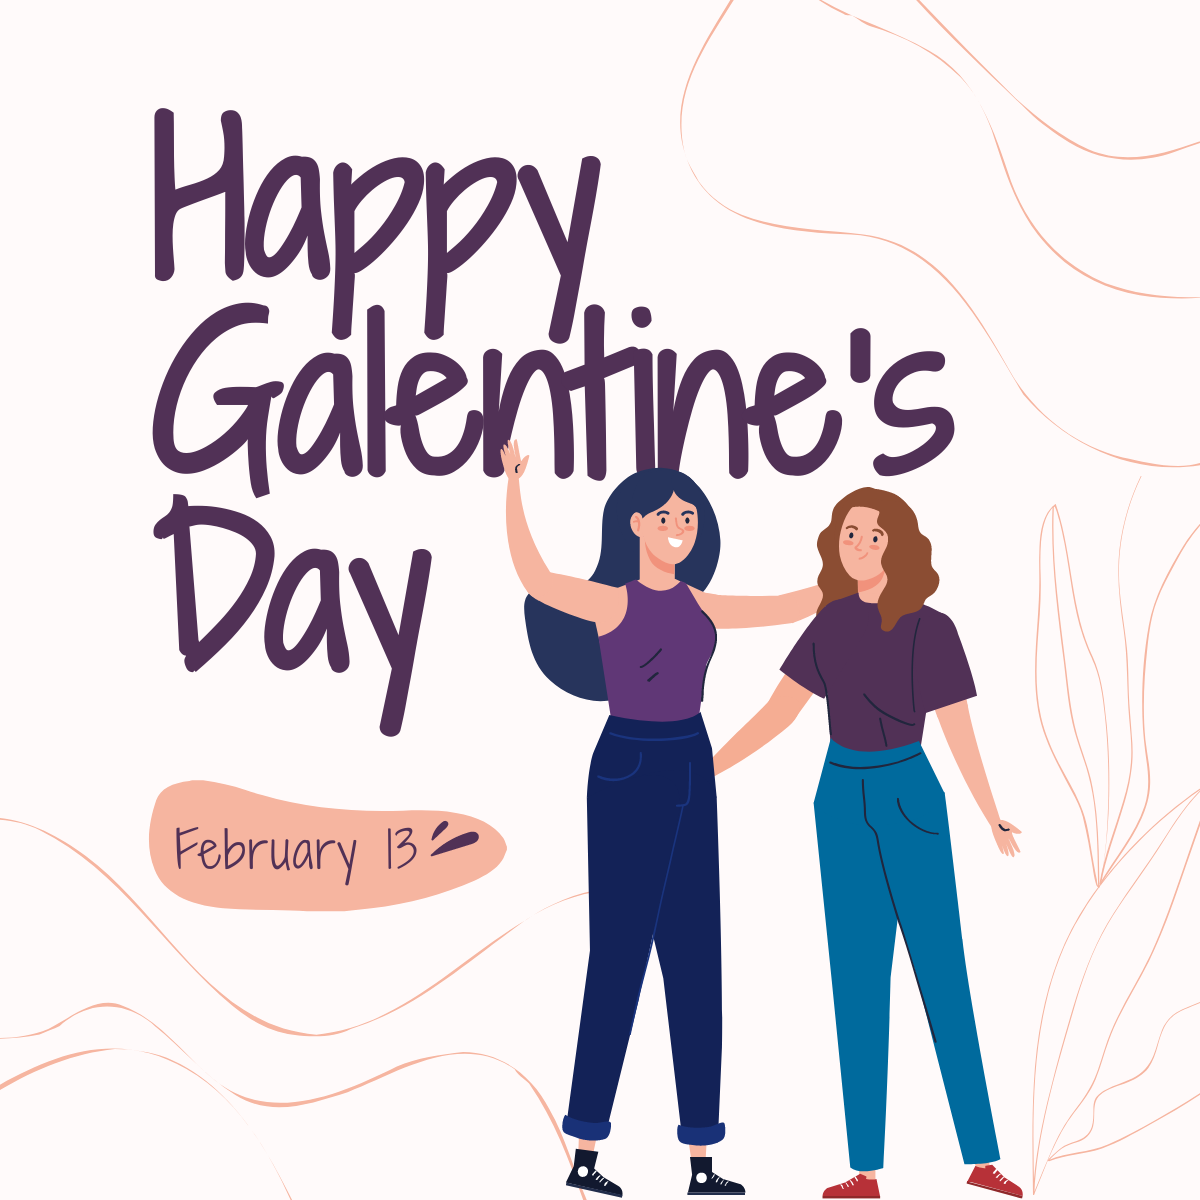 Free Happy Galentines Day Linkedin Post Template